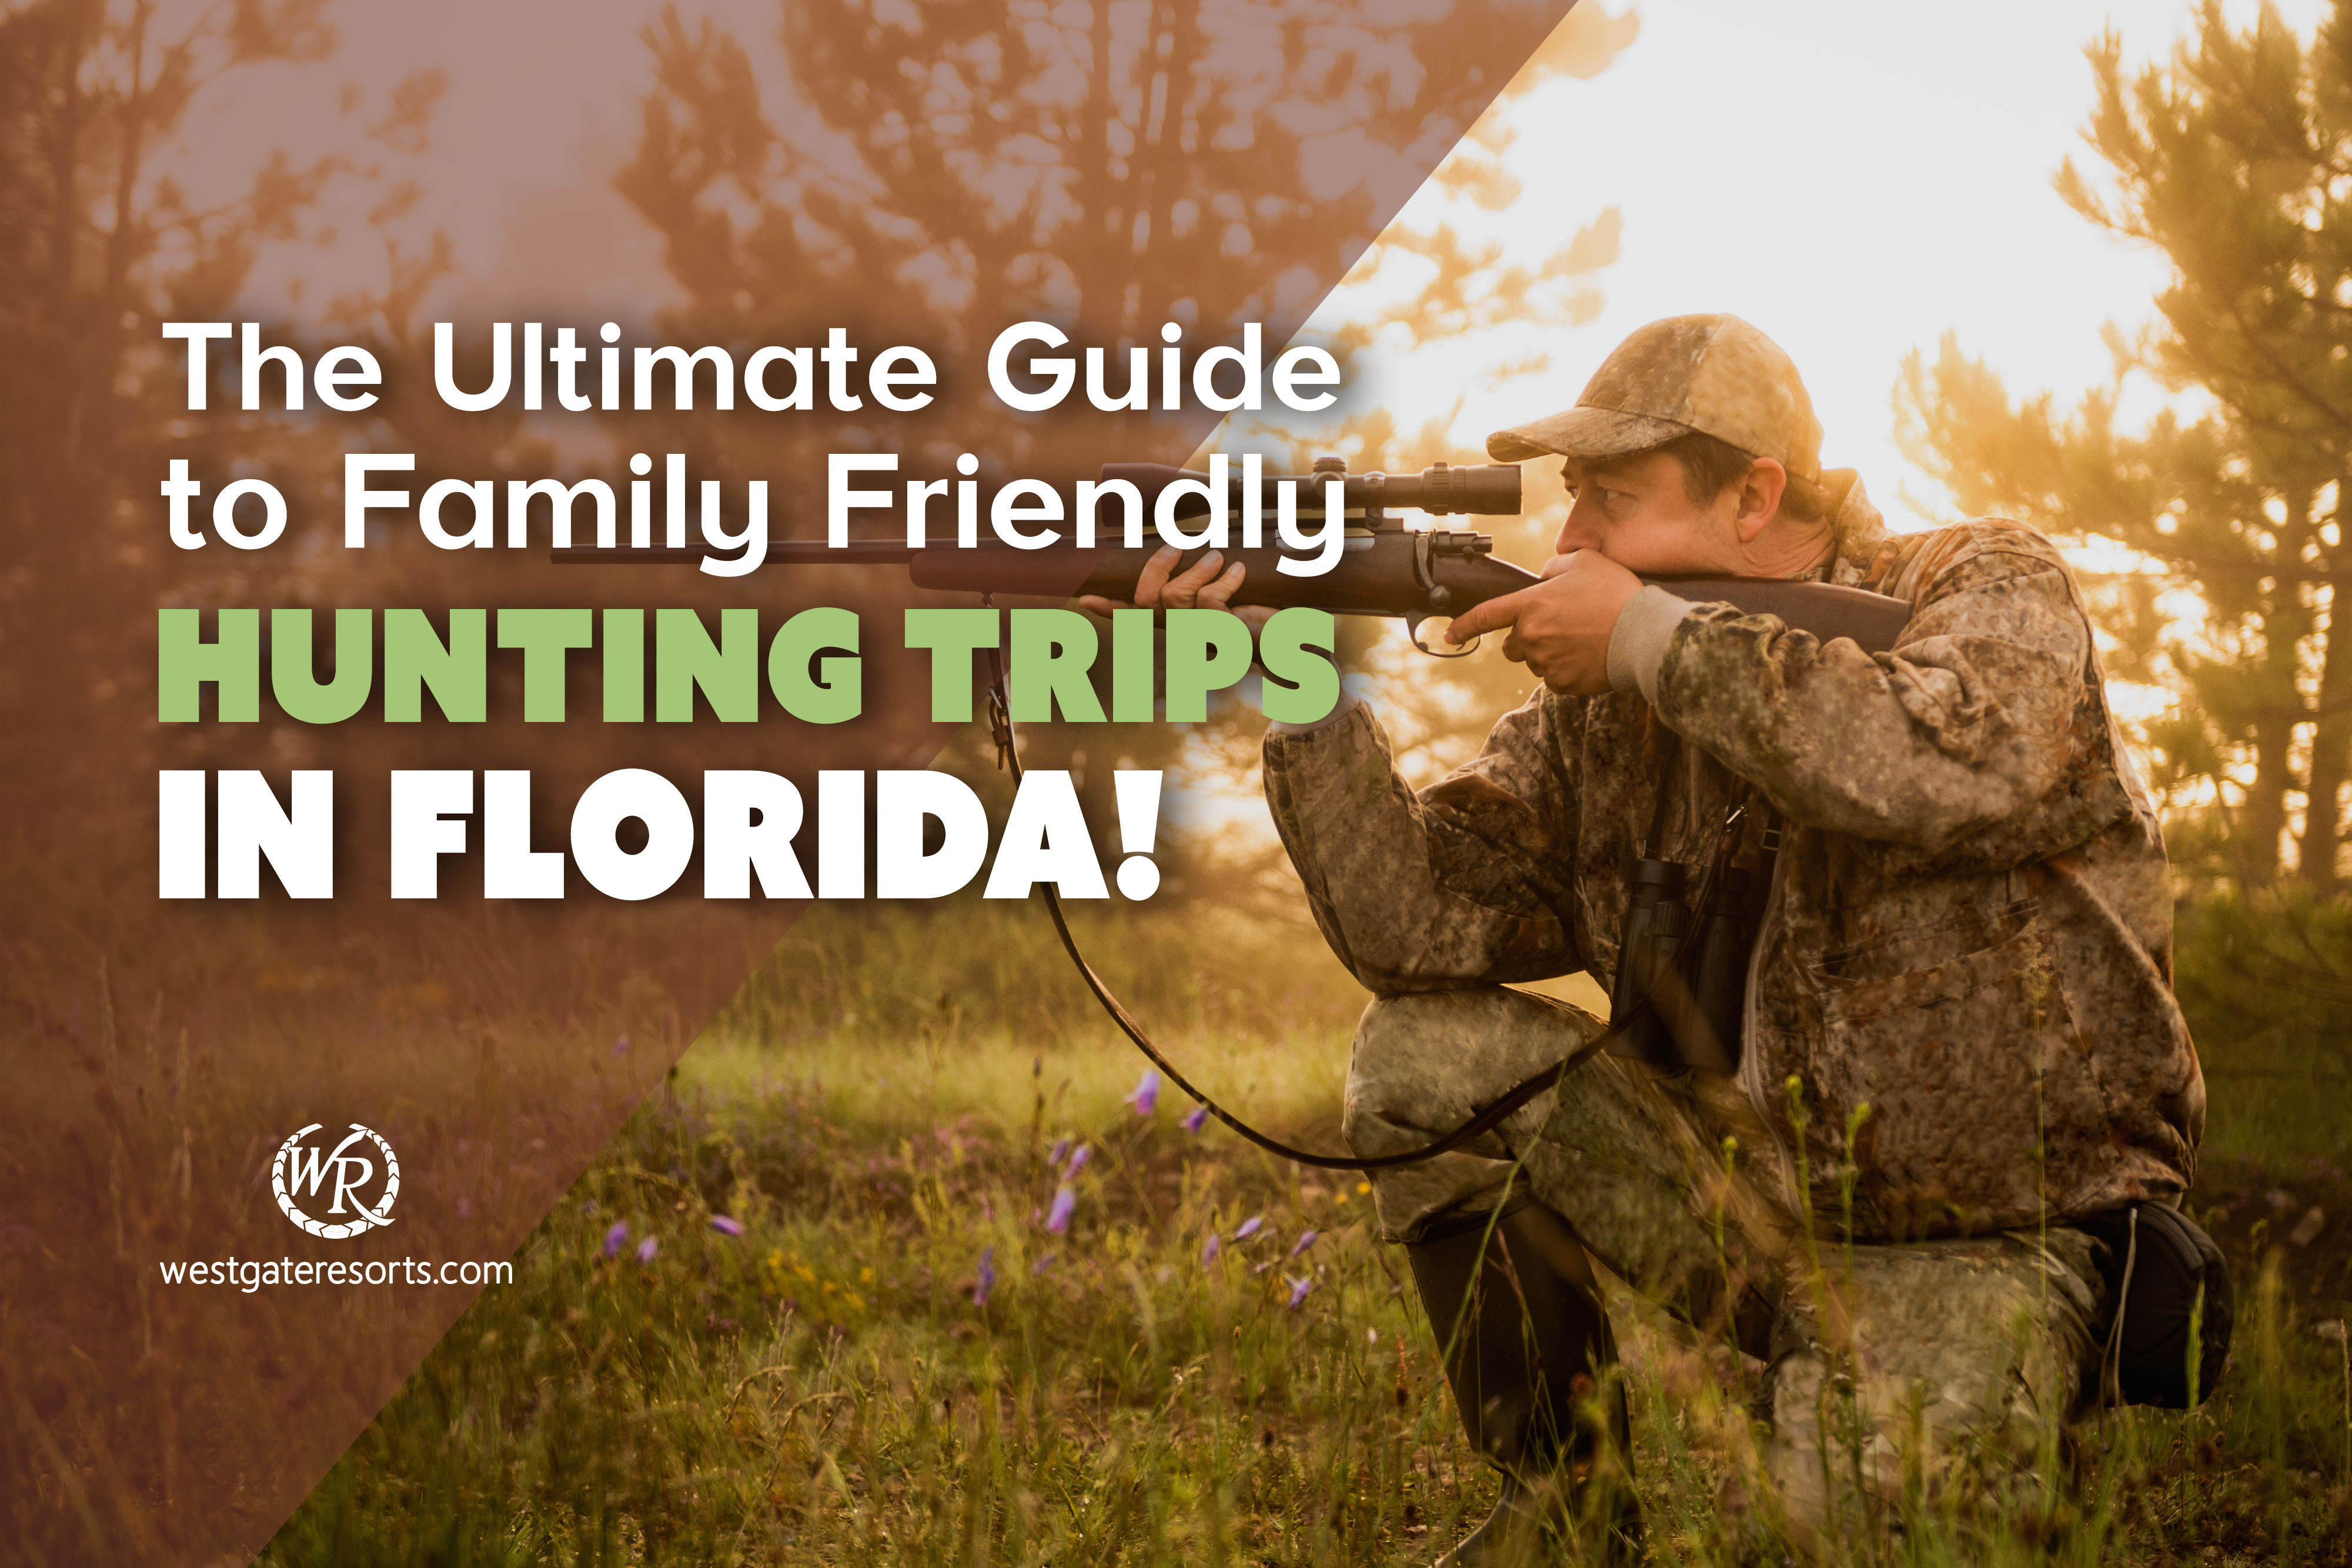 The Ultimate Guide to Family Friendly Hunting Trips in Florida!